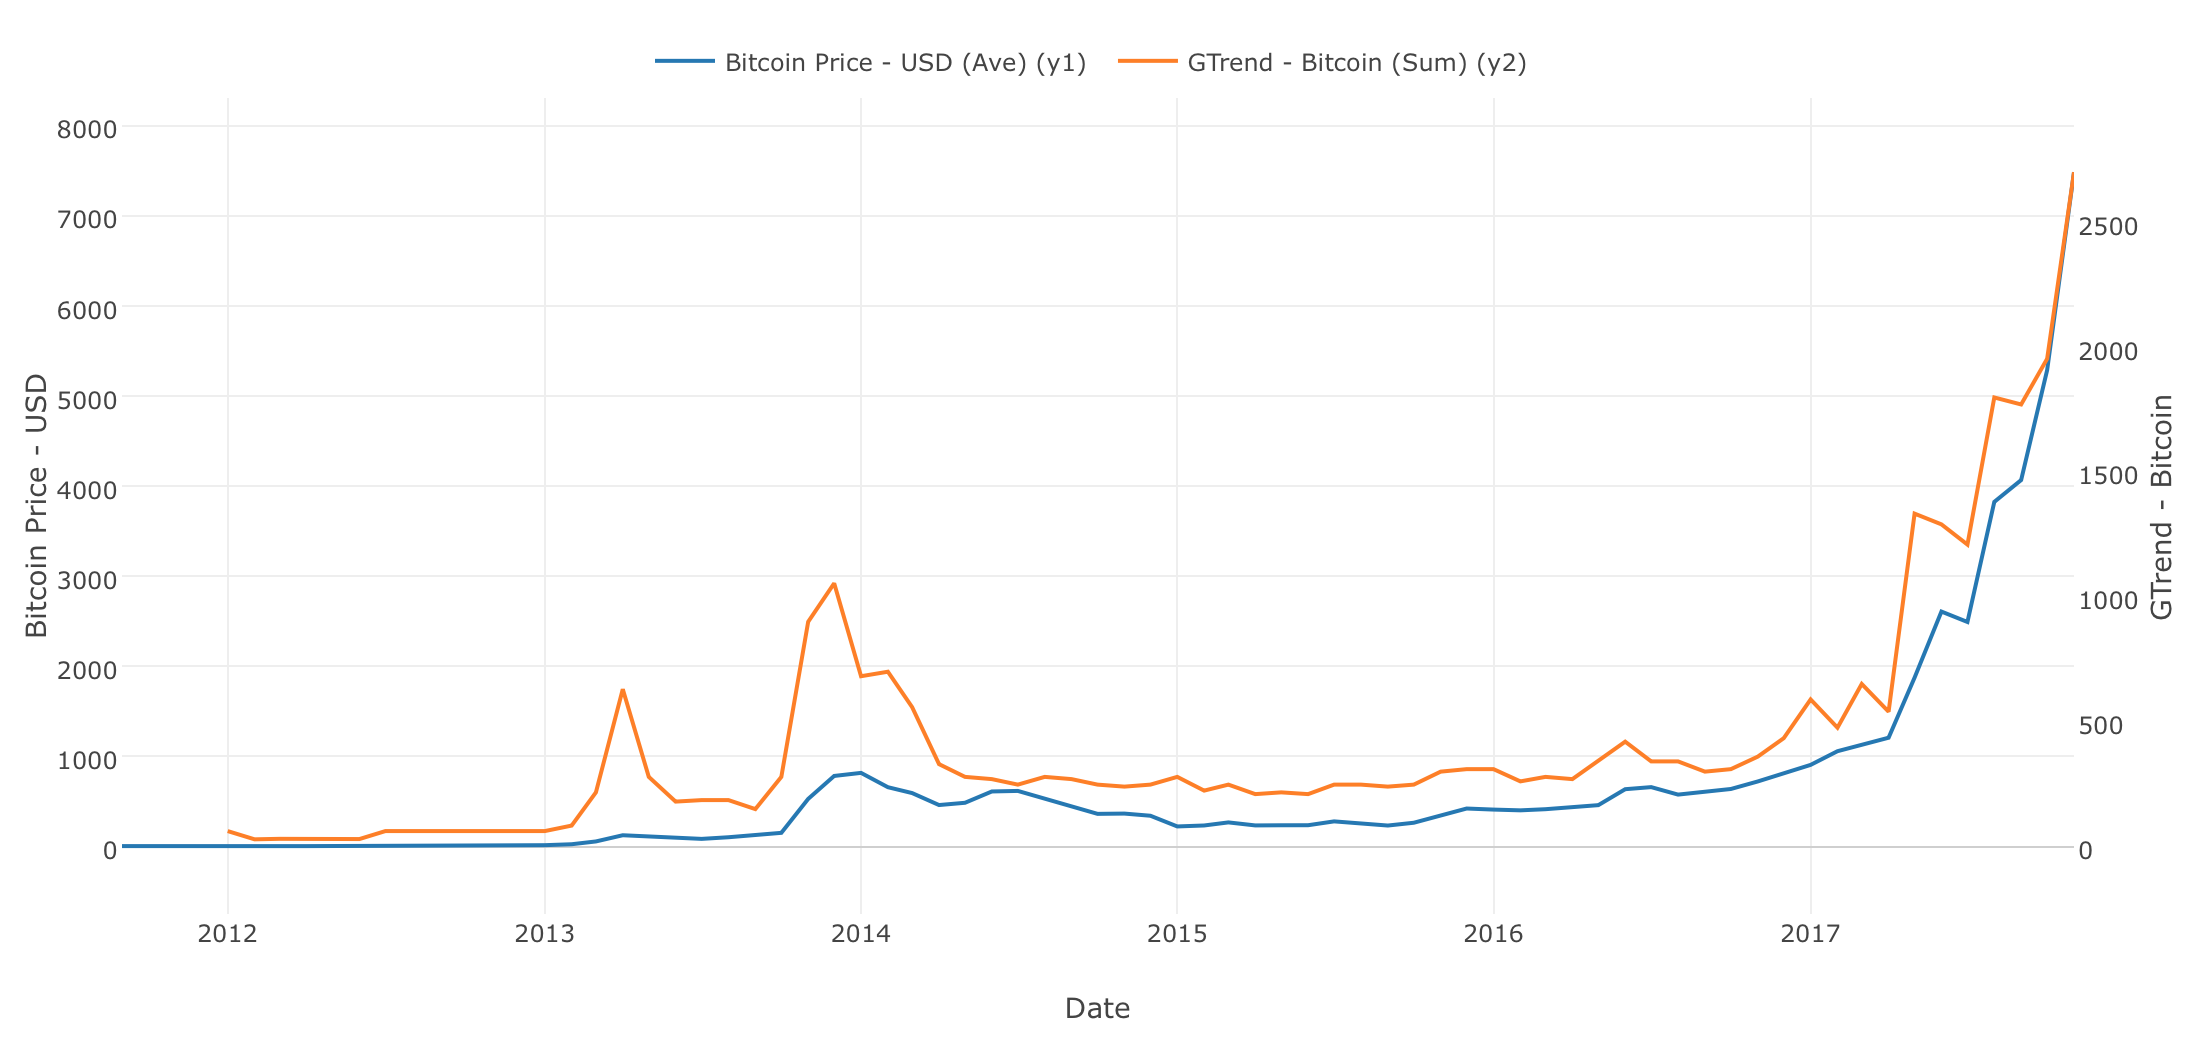 Can We Predict Bitcoin Price With Google Trend Learn Data Science - 